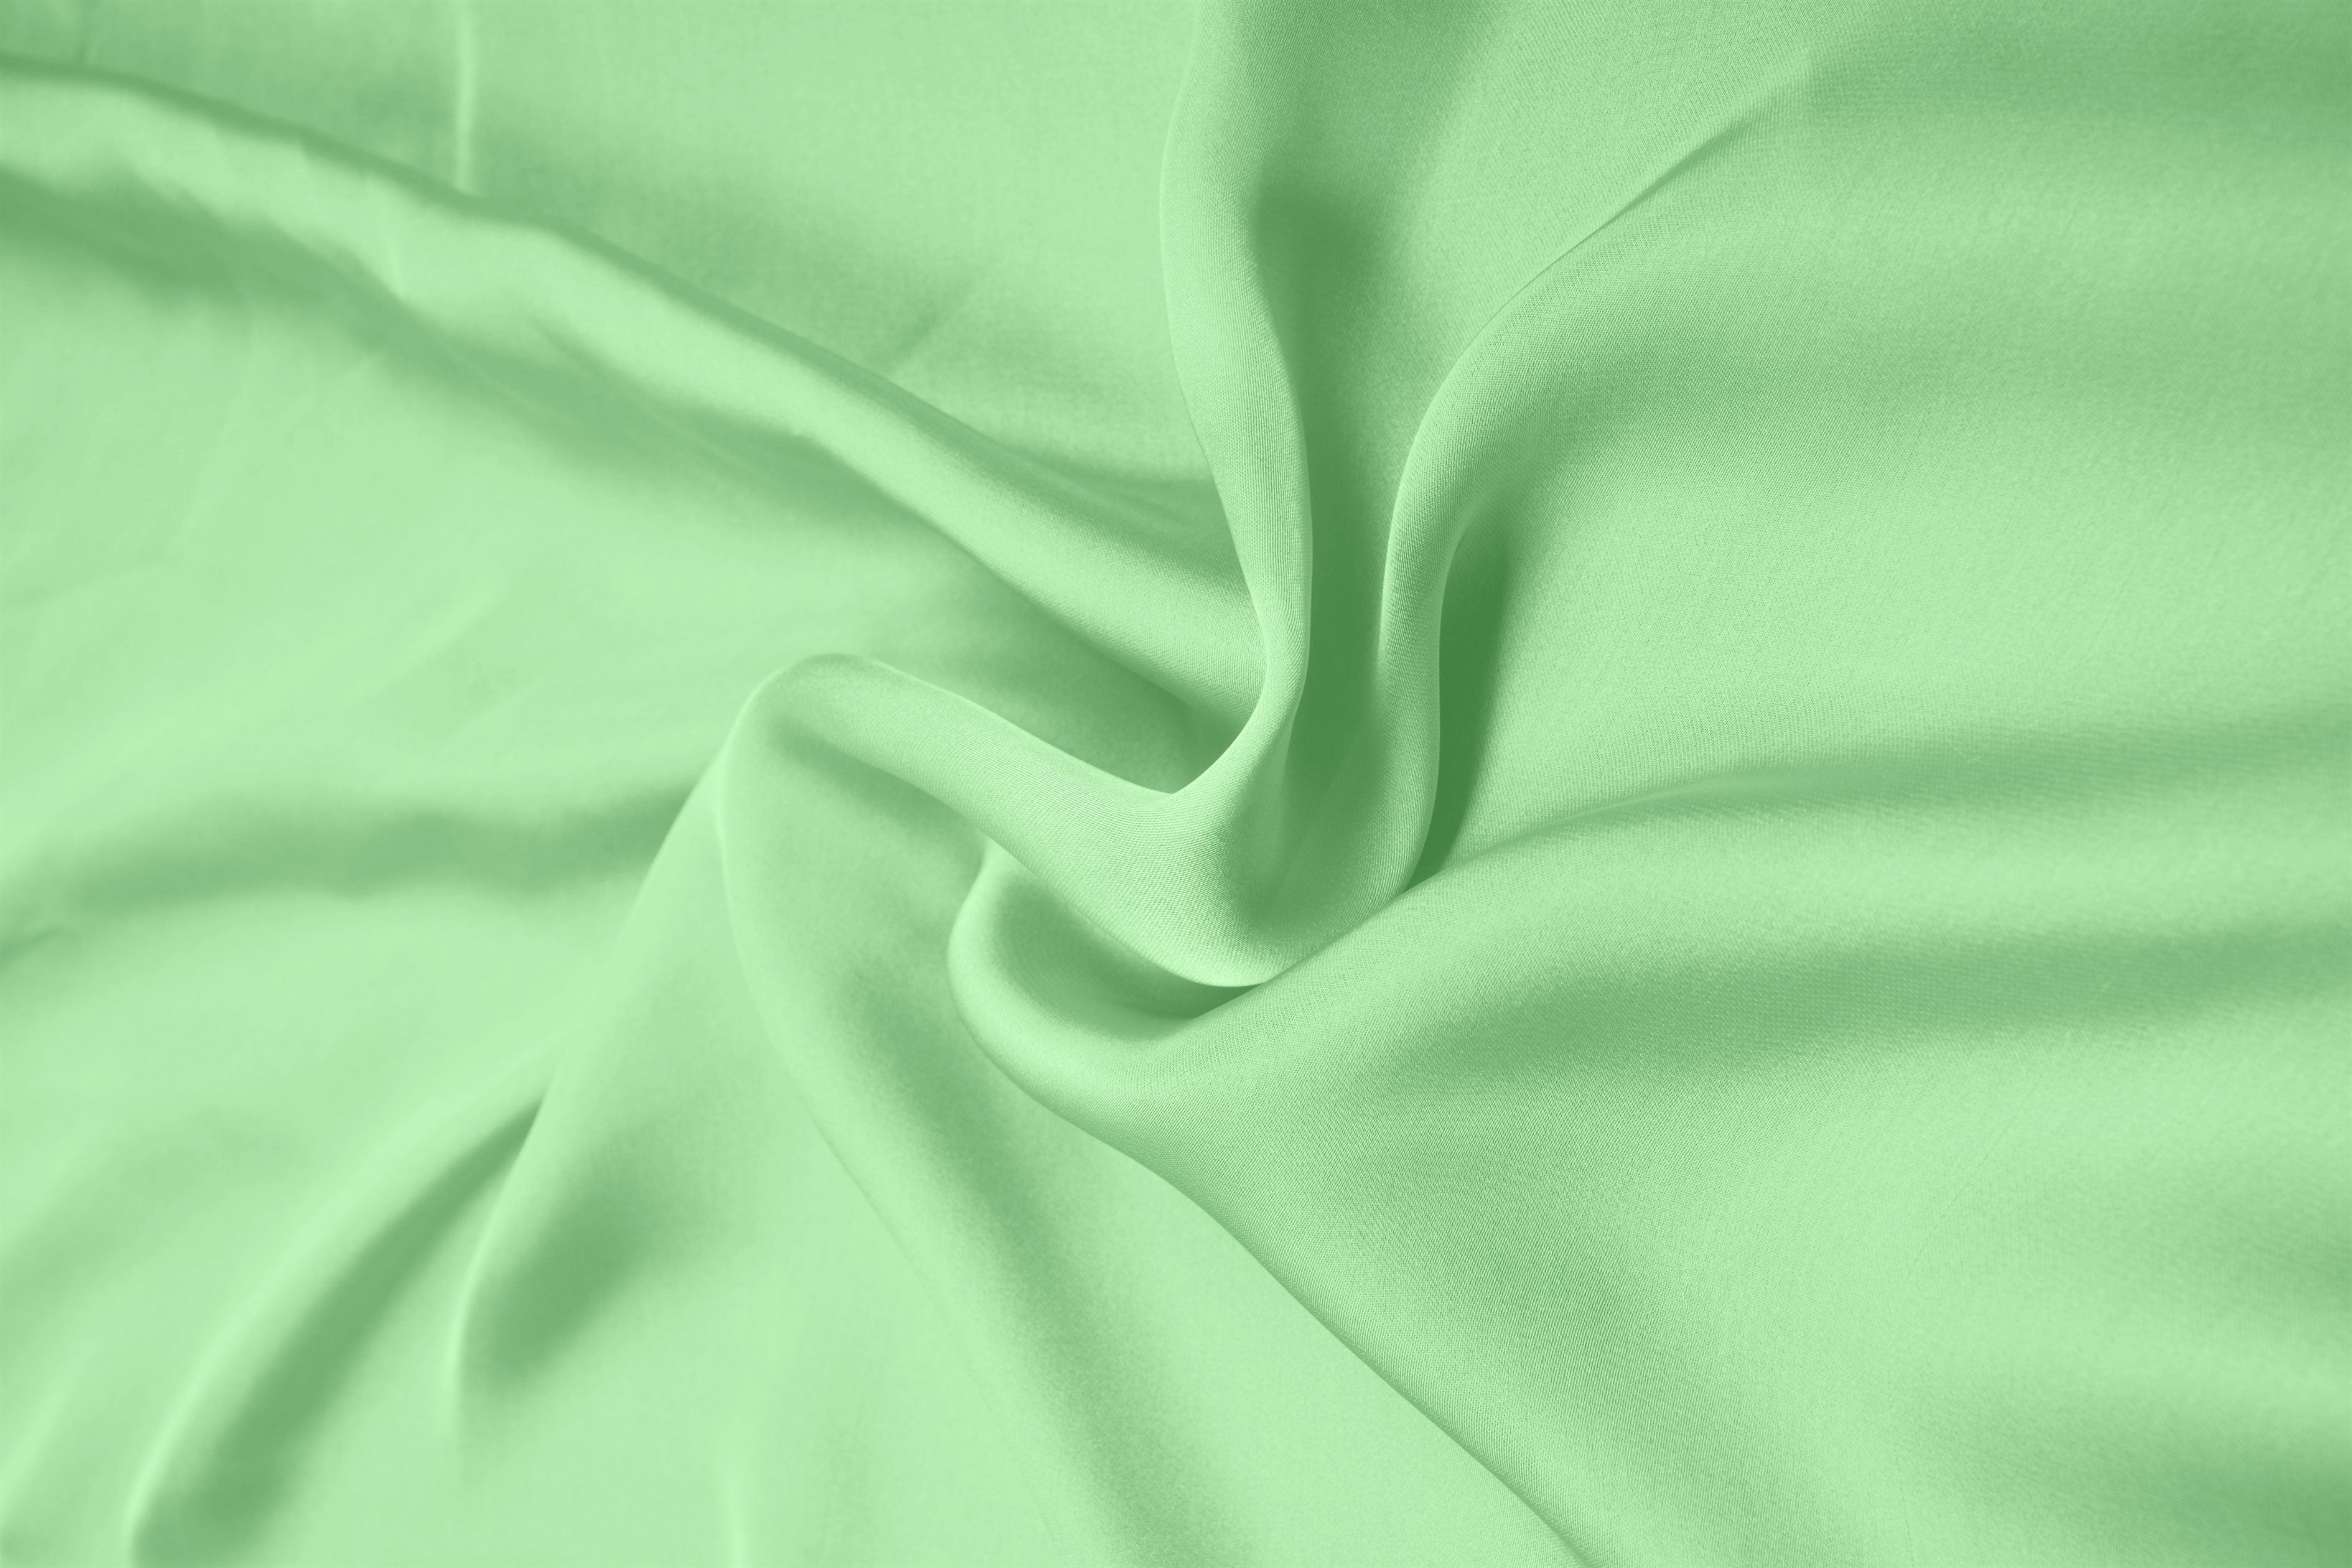 Pista Green Plain Dyed Satin Georgette Fabric